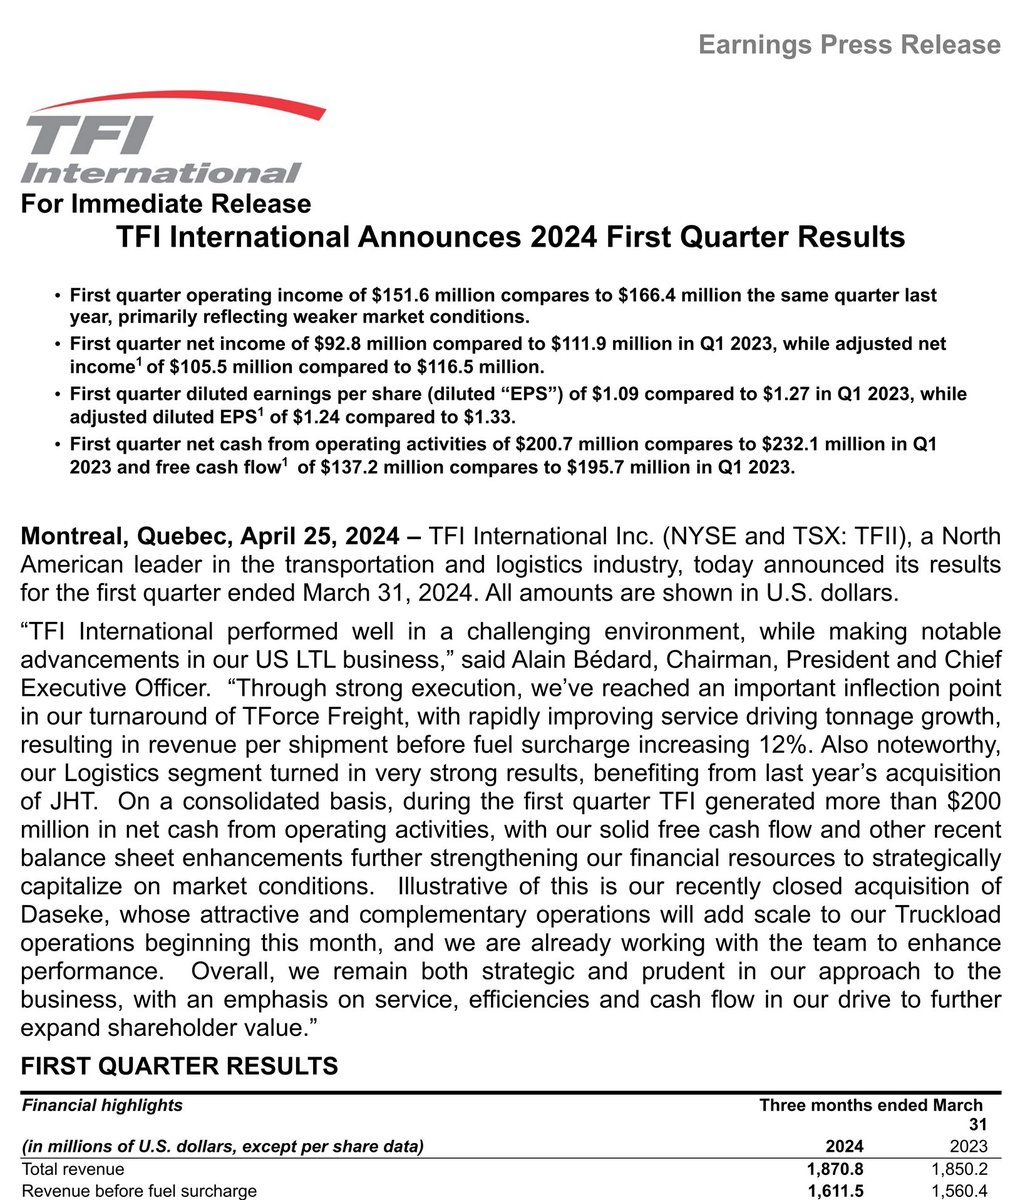 $TFII Q1'24:

Revenue: $1,870.8m
FCF: $137.2m
Net income: $92.8m
EPS: $1.09/share

Reached an important inflection point in turnaround of TForce Freight
Rapidly improving service driving tonnage growth
Revenue per shipment before fuel surcharge increased 12%